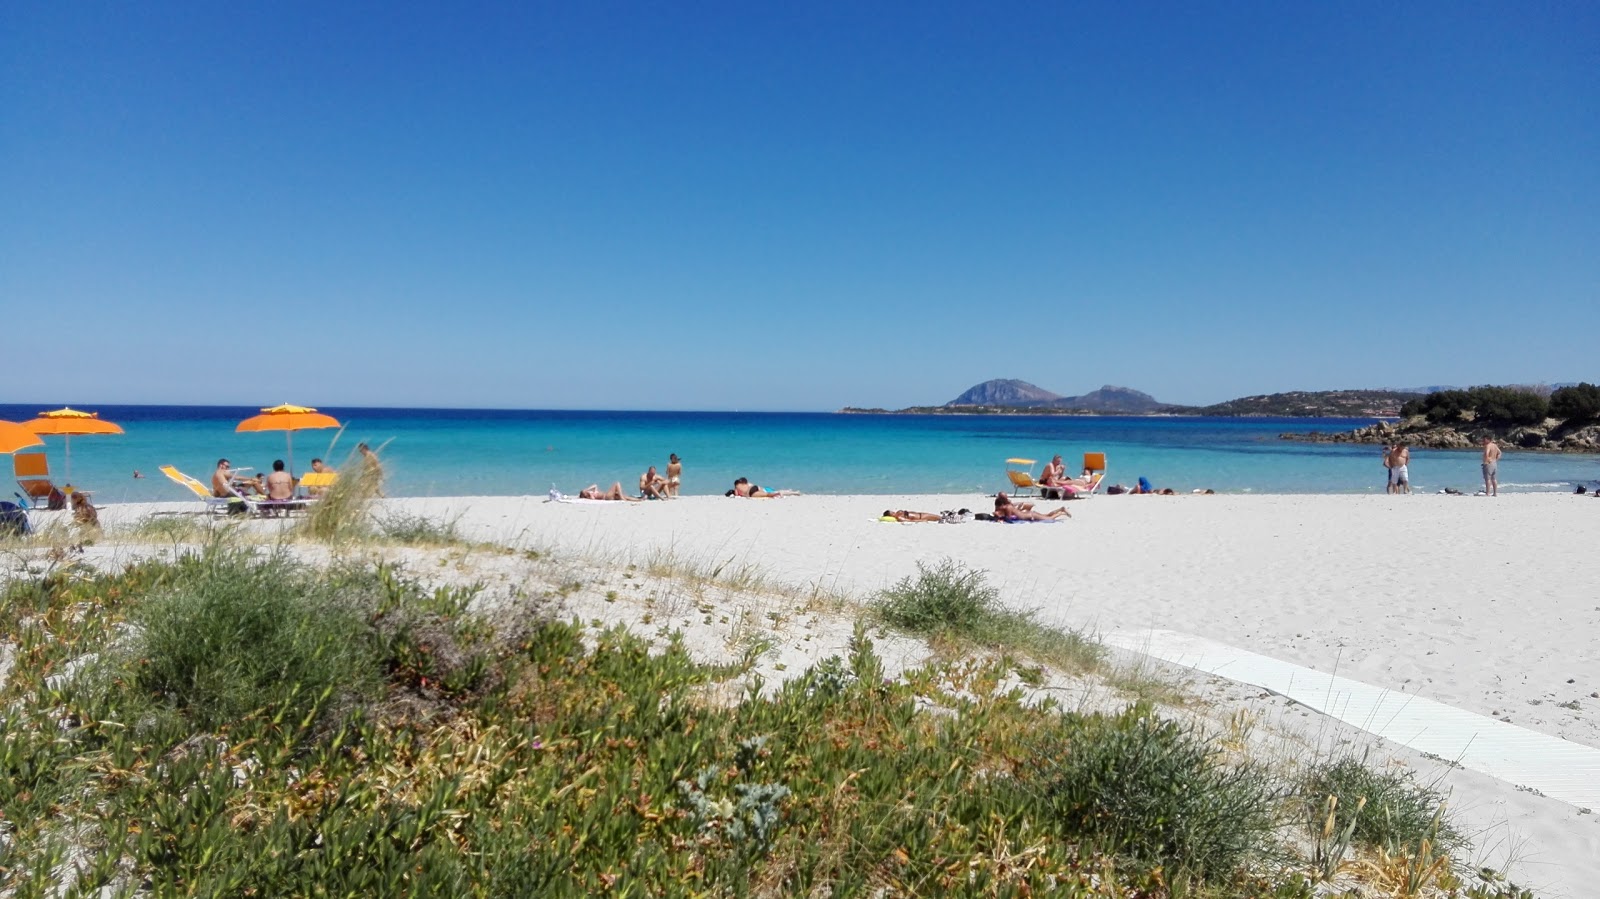 Photo of Spiaggia di Rena Bianca - recommended for family travellers with kids